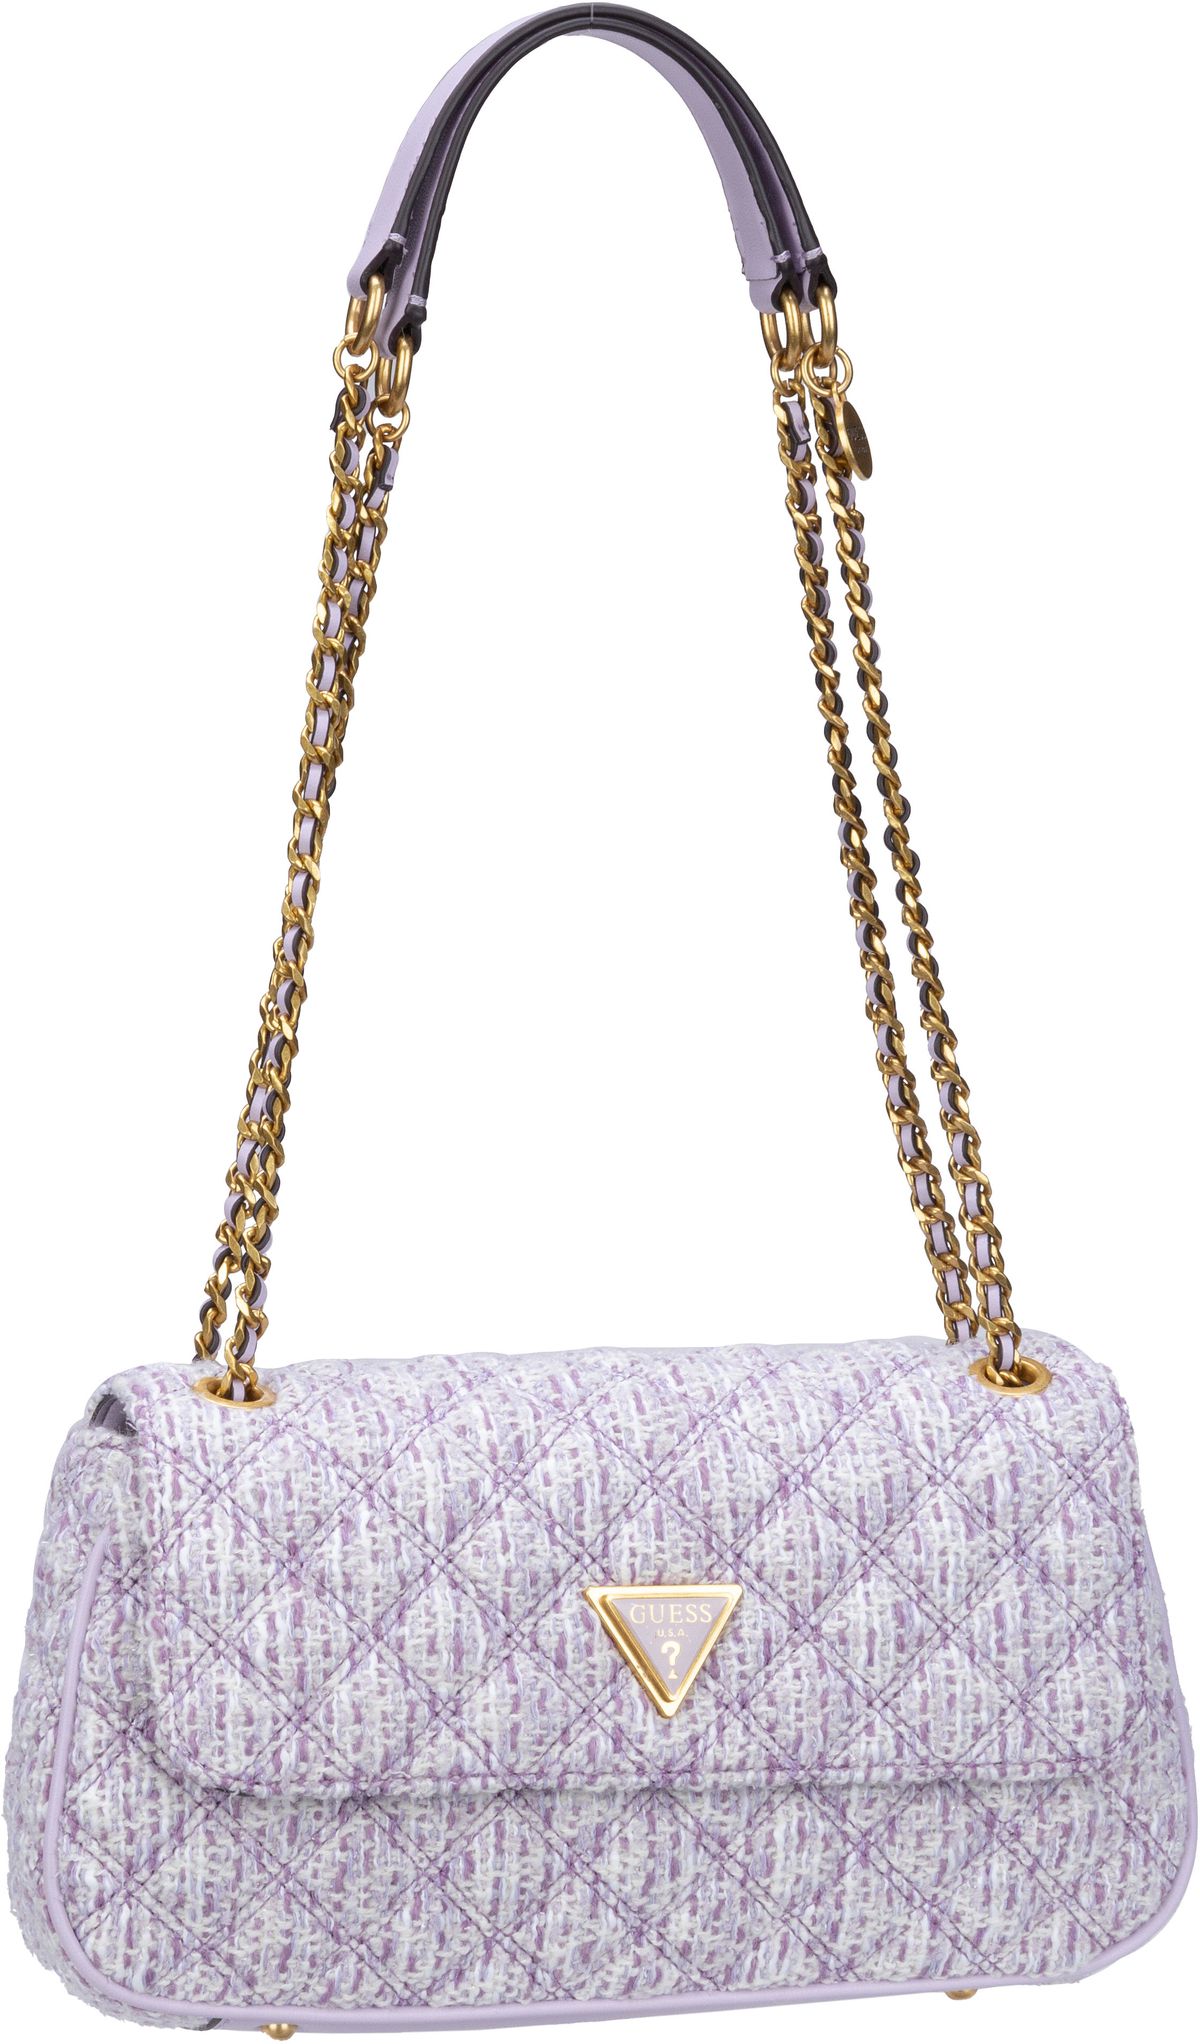 Guess Giully Conv Crossbody Flap Tweed  in Violett (4 Liter), Schultertasche